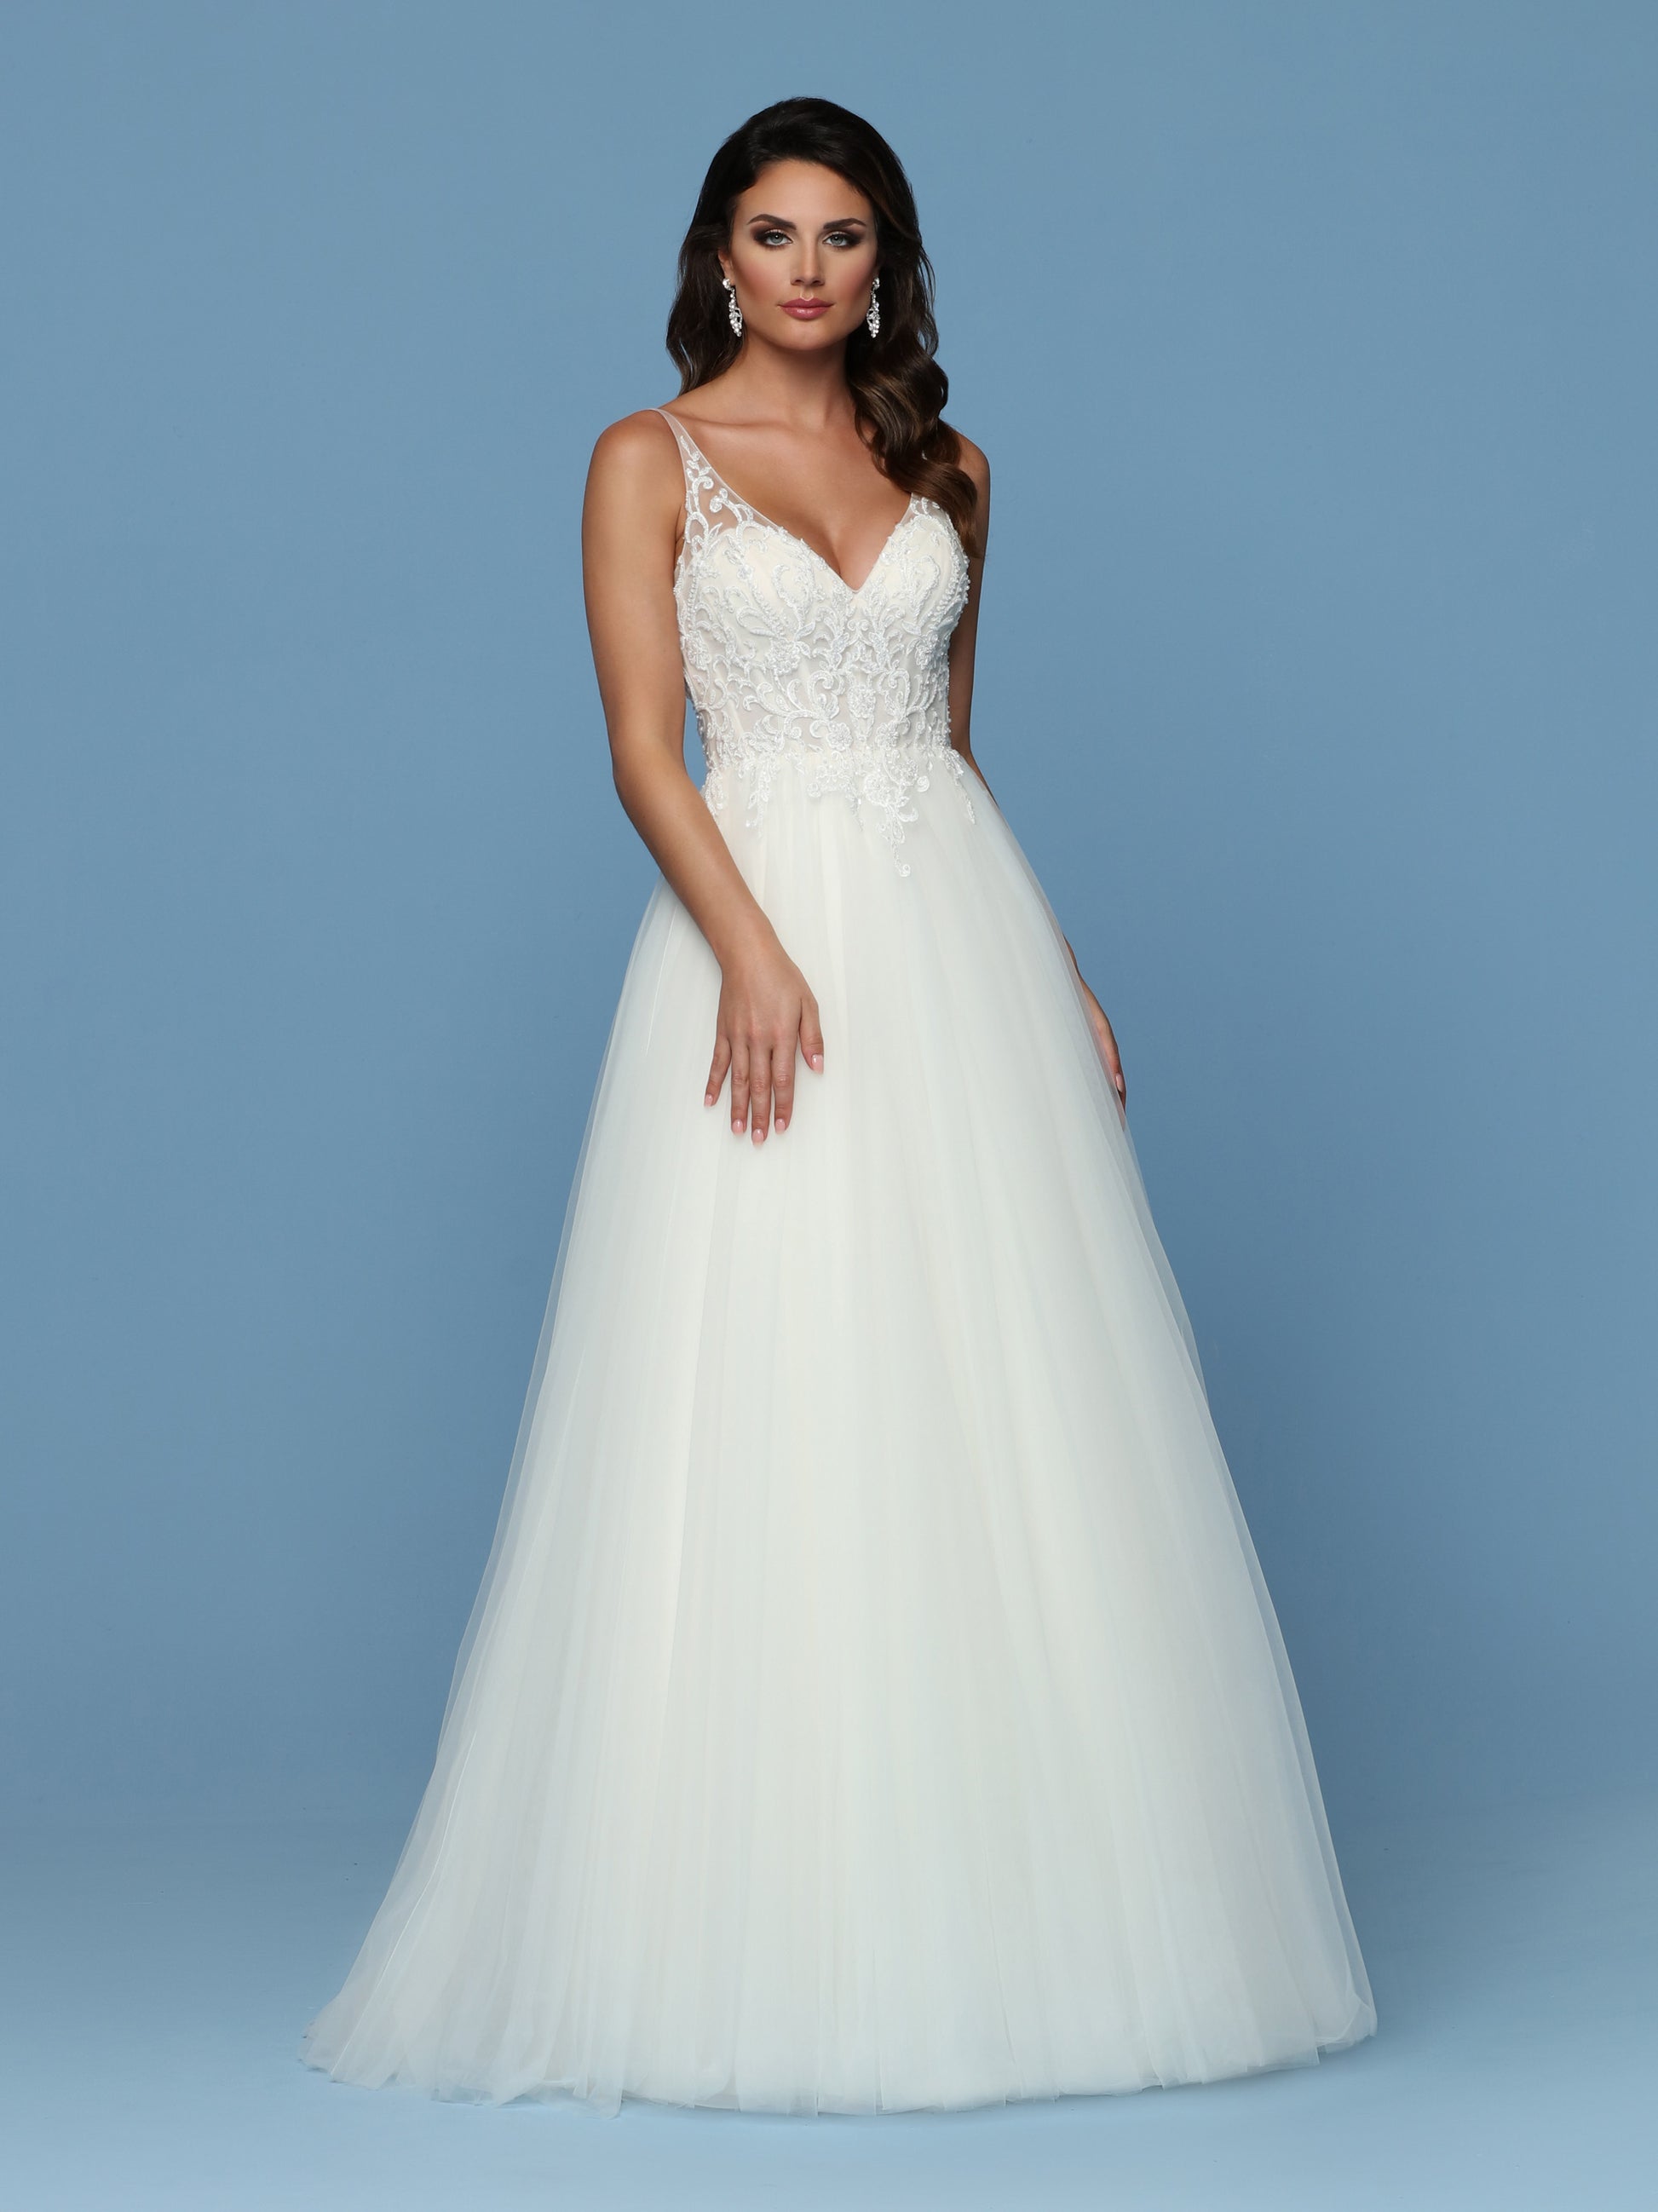 Davinci Bridal 50571 is a Tulle ballgown wedding dress with a sweetheart sheer Illusion V neckline. Embellished lace along the bodice cascading into the full tulle skirt. Sheer Illusion lace Embellished Straps.  Available for 1-2 Week Delivery!!!  Available Sizes: 2,4,6,8,10,12,14,16,18,20  Available Colors: Ivory/Blush, Ivory/Ivory